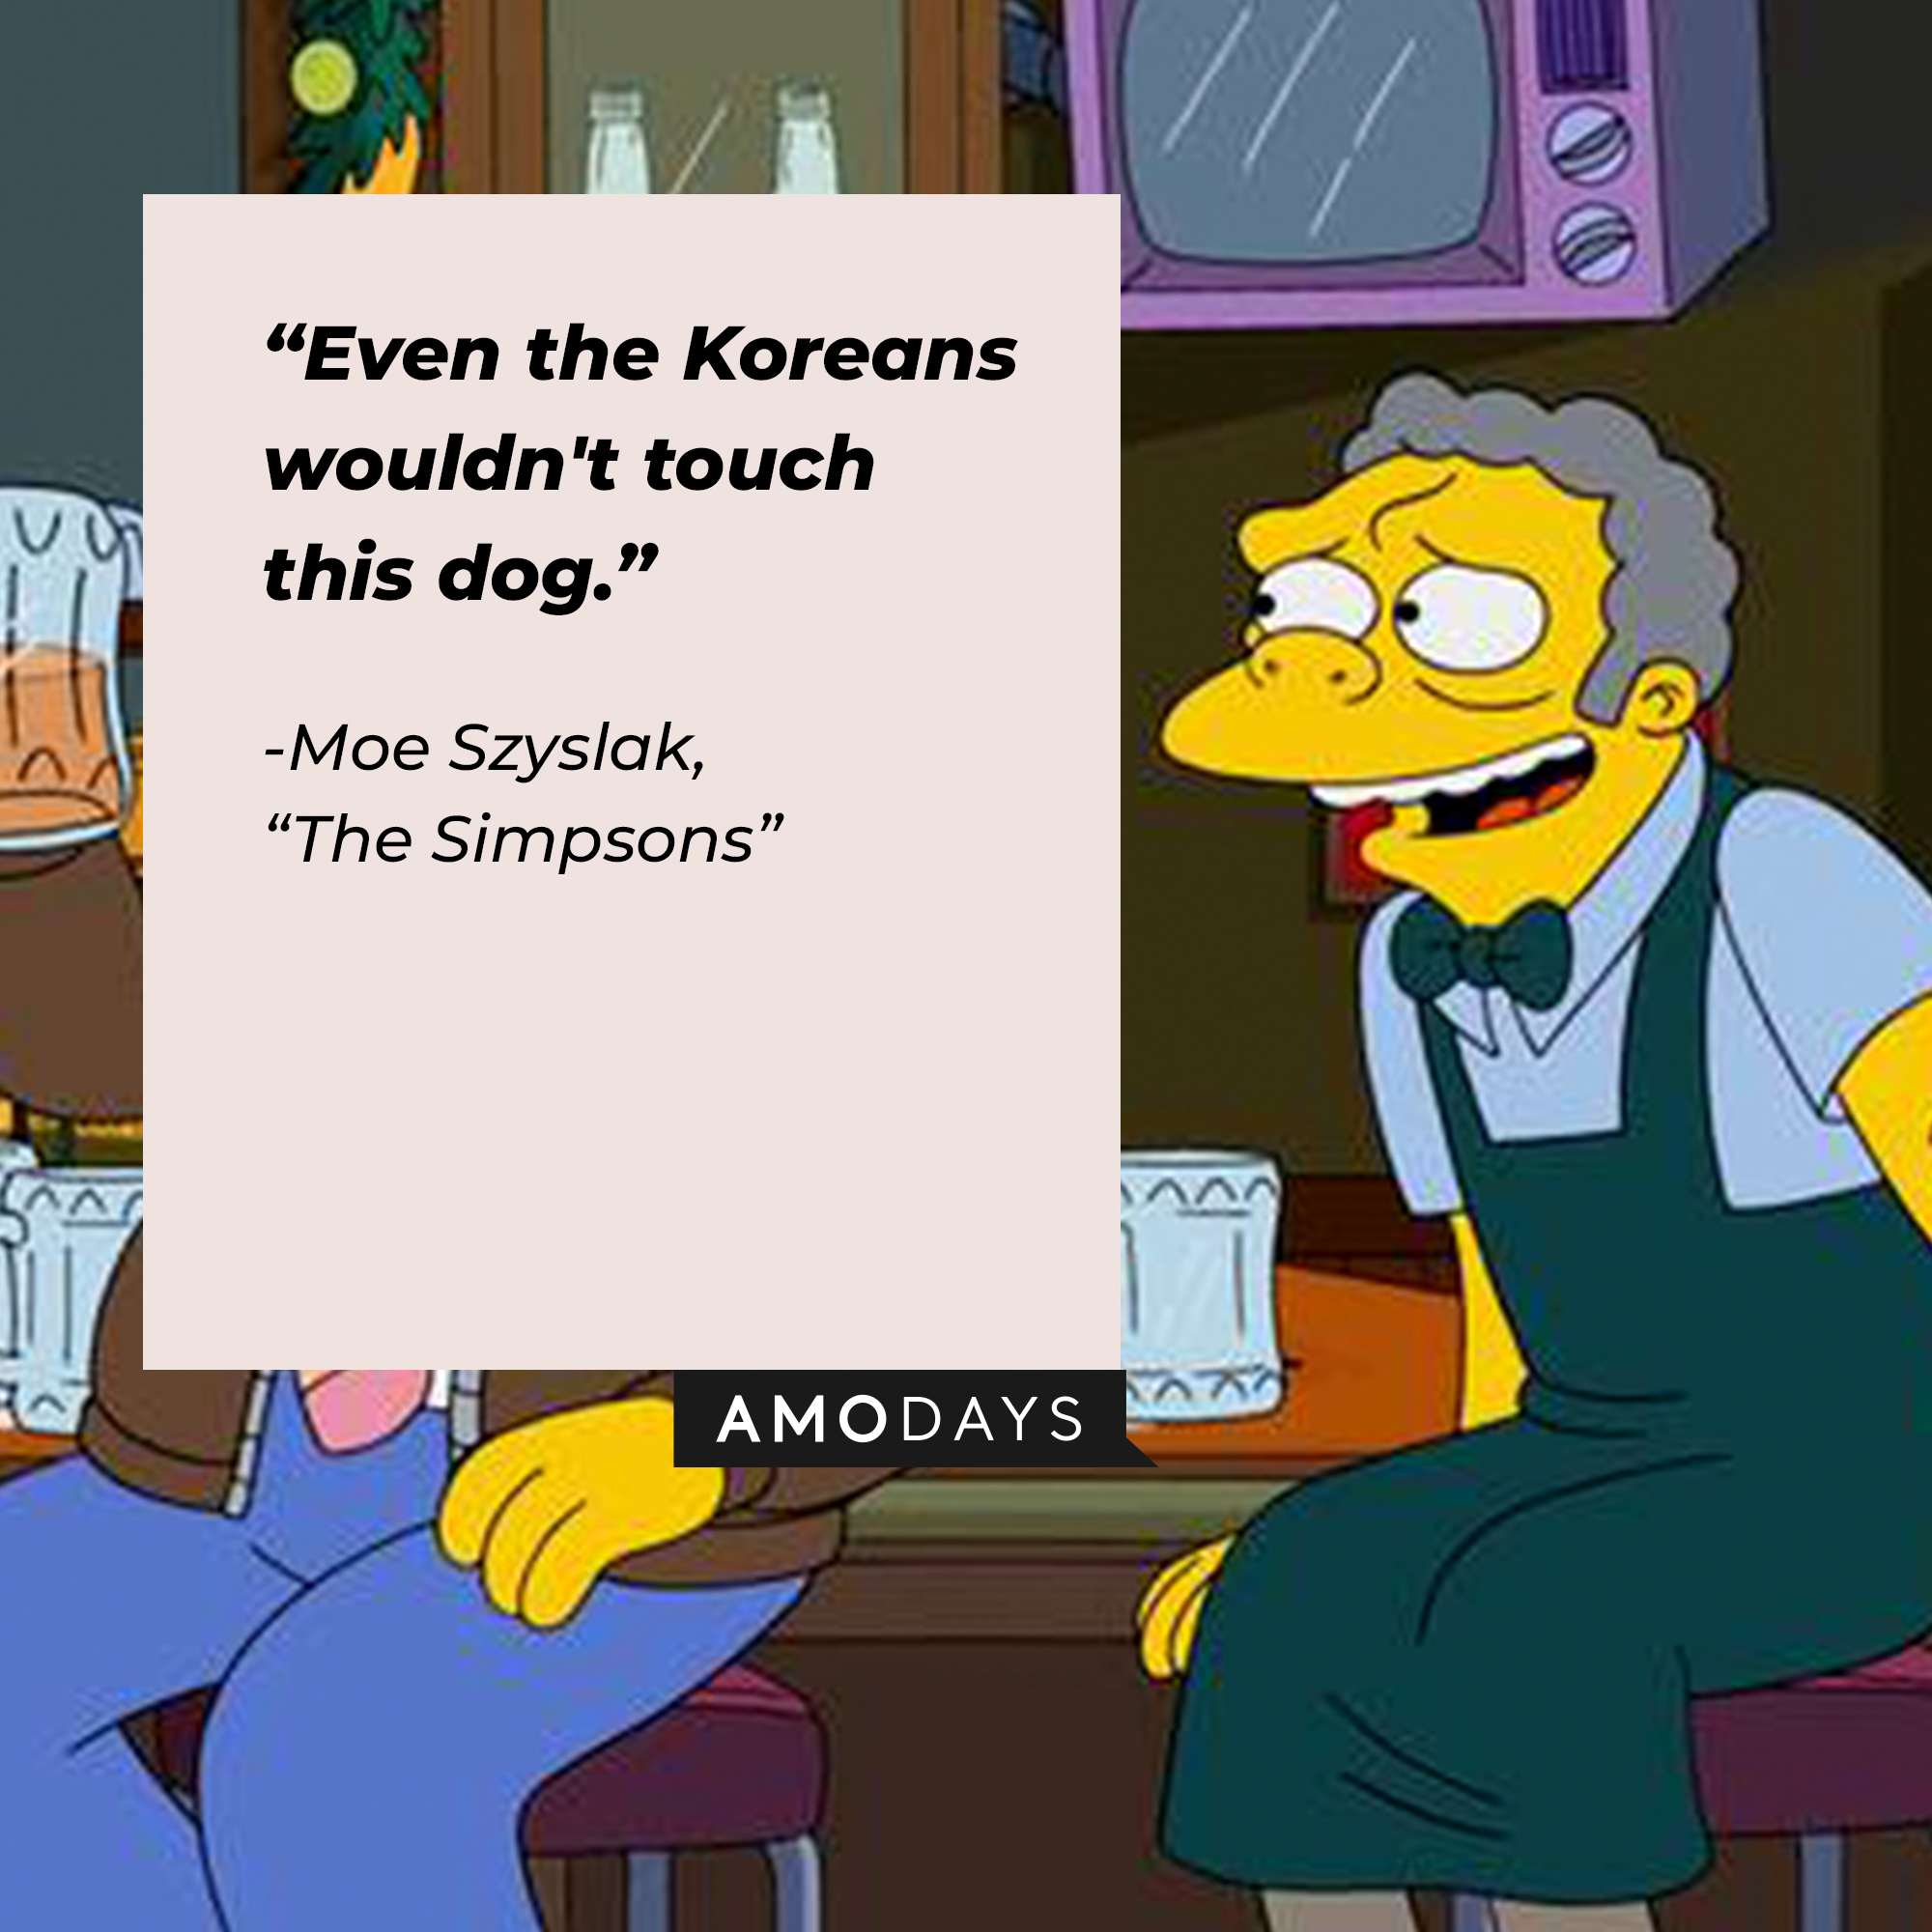 Image of Moe Szyslak with his quote from "The Simpsons:" “Even the Koreans wouldn't touch this dog." | Source: Facebook.com/TheSimpsons